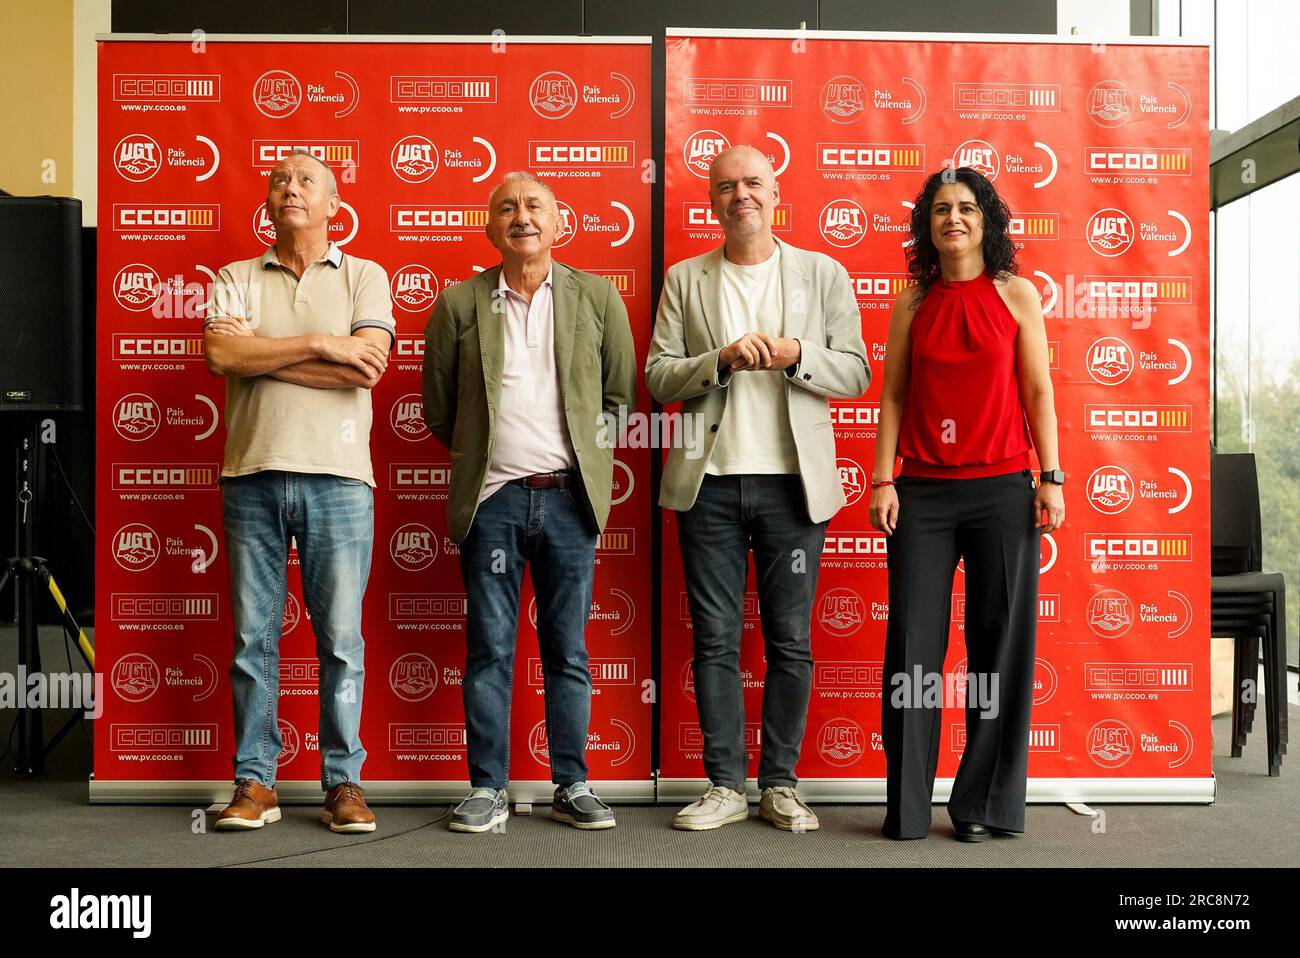 (L-R) The secretary general of UGT PV, Ismael Sáez; the secretary general of UGT, Pepe Álvarez; the secretary general of CCOO, Unai Sordo, and the secretary general of CCOO PV, Ana García, pose on their arrival at the assembly on the occasion of the AvançarEnDrets-Asamblea conjunta UGT-CCOO, in La Rambleta, on July 13, 2023, in Valencia, Community of Valencia (Spain). Under the name 'Advancing in rights' this meeting between the majority trade unions in Spain will take place. 13 JULY 2023;VALENCIA;JOINT ASSEMBLY;UGT AND CCOO Eduardo Manzana / Europa Press 07/13/2023 (Europa Press via AP) Stock Photo